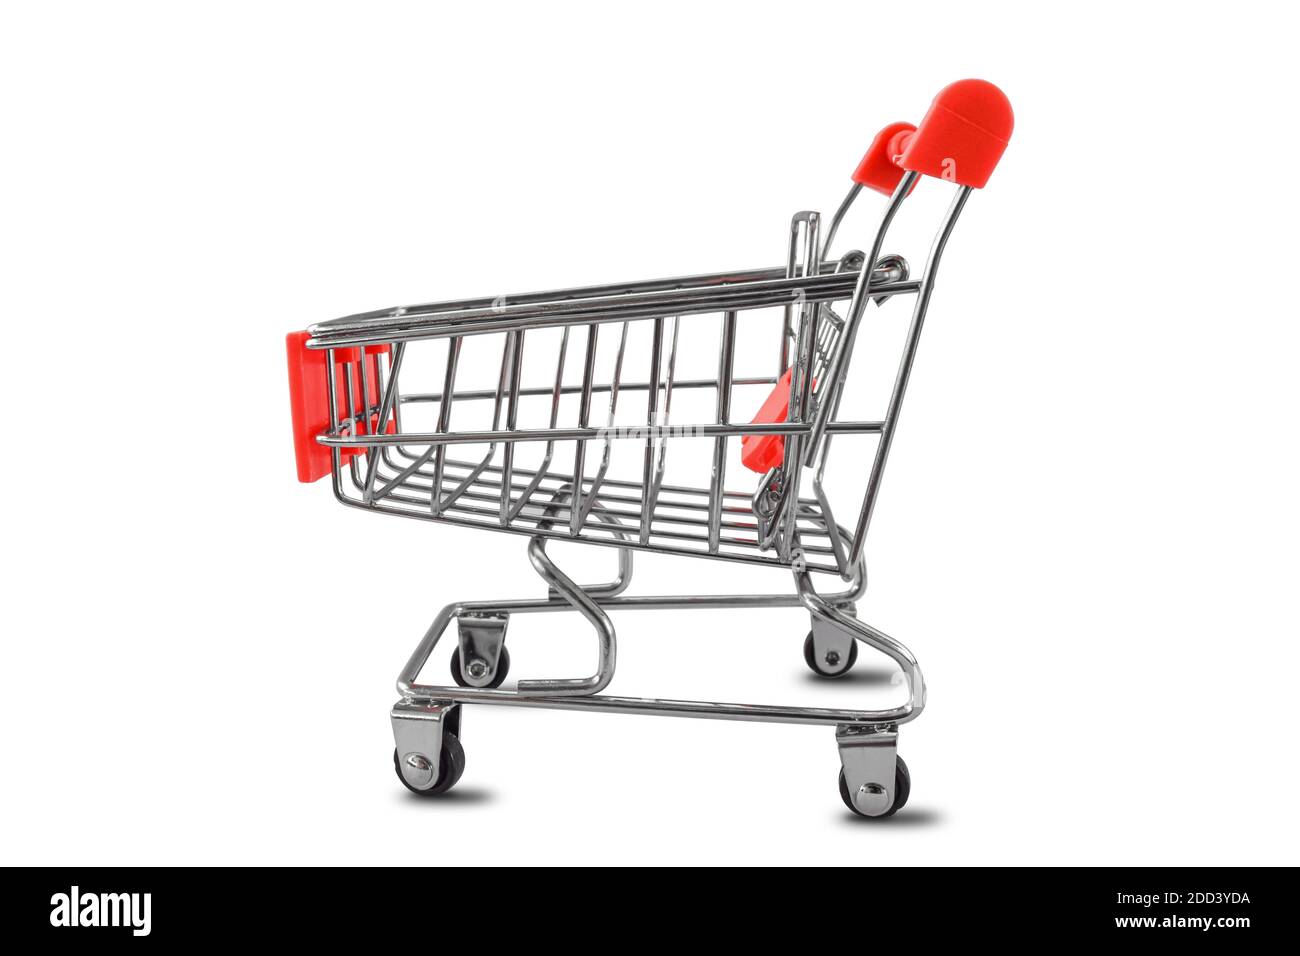 Side view of shopping cart isolated on white background. Object with clipping path. Stock Photo